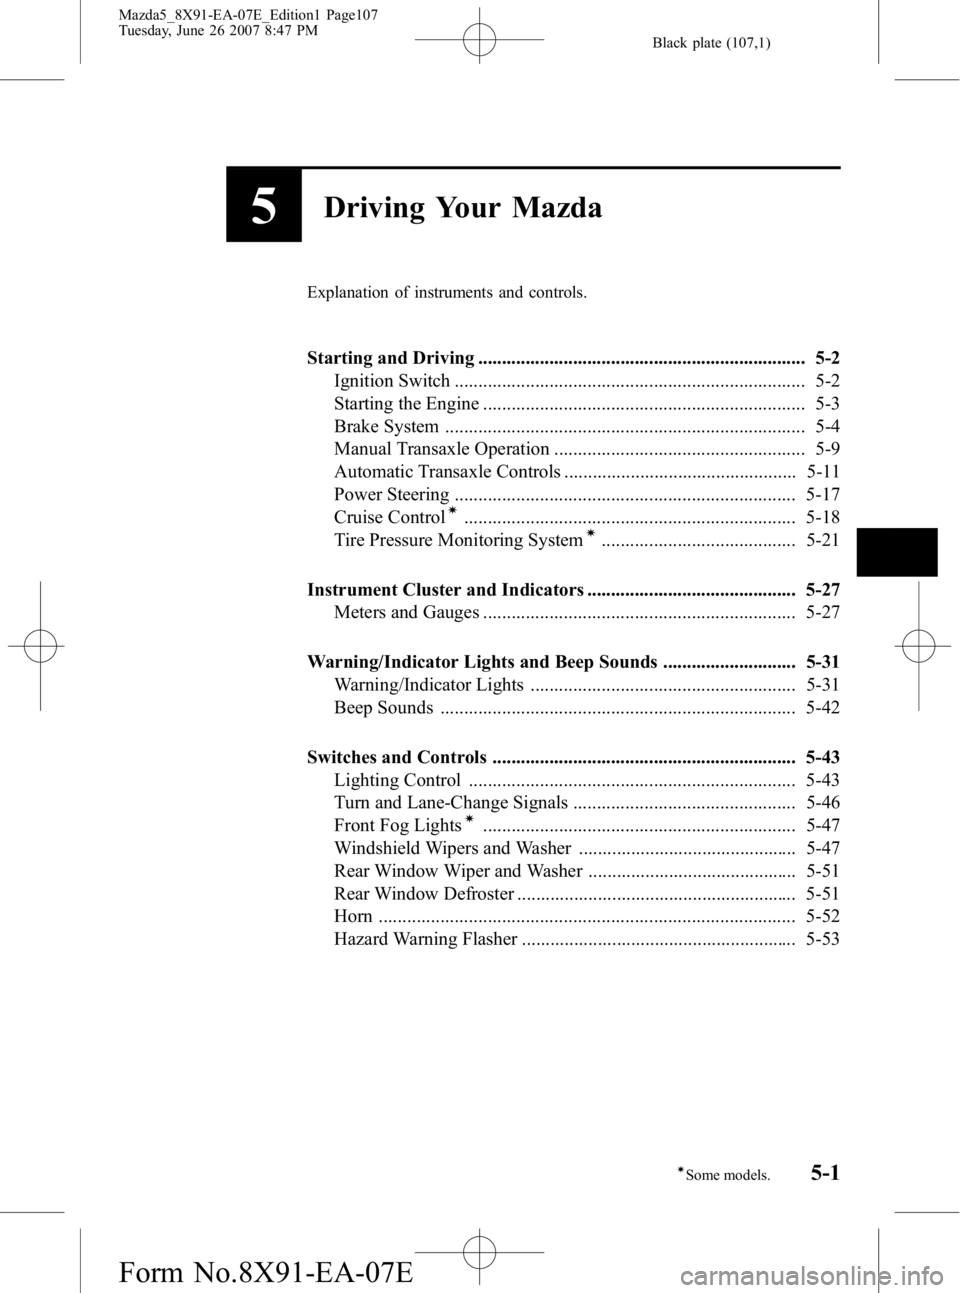 MAZDA MODEL 5 2007  Owners Manual Black plate (107,1)
5Driving Your Mazda
Explanation of instruments and controls.
Starting and Driving ..................................................................... 5-2Ignition Switch .........